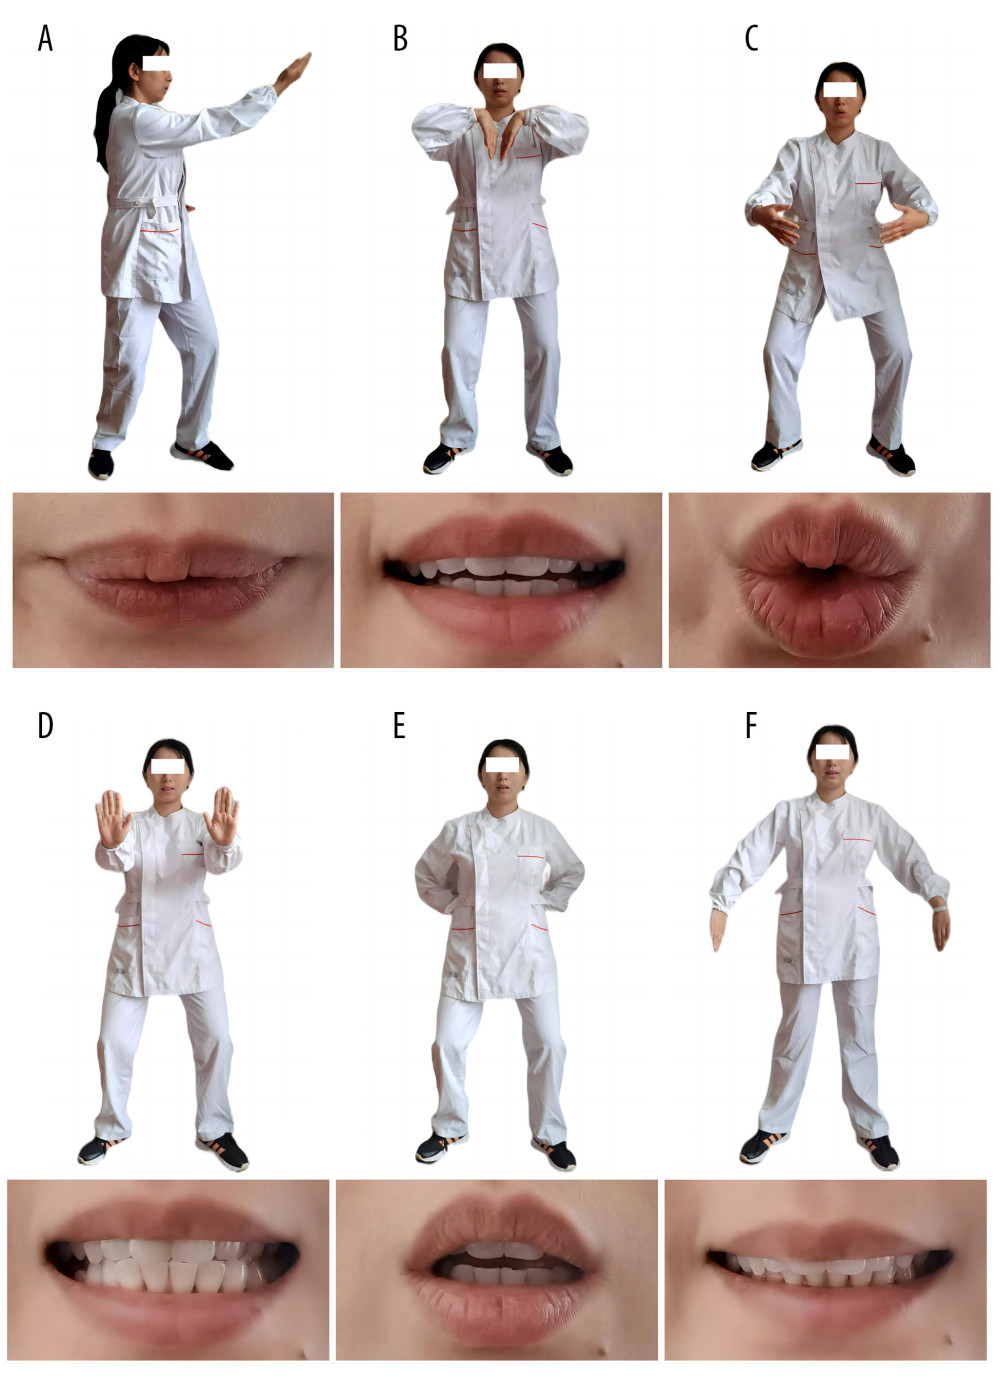 Movement and mouth shape of Liuzijue Qigong in pronunciation. Liuzijue Qigong: (A) movement and mouth shape in pronunciation “XU”; (B) movement and mouth shape in pronunciation “HE”; (C) movement and mouth shape in pronunciation “HU”; (D) movement and mouth shape in pronunciation “SI”; (E) movement and mouth shape in pronunciation “CHUI”; and (F) movement and mouth shape in pronunciation “XI”.